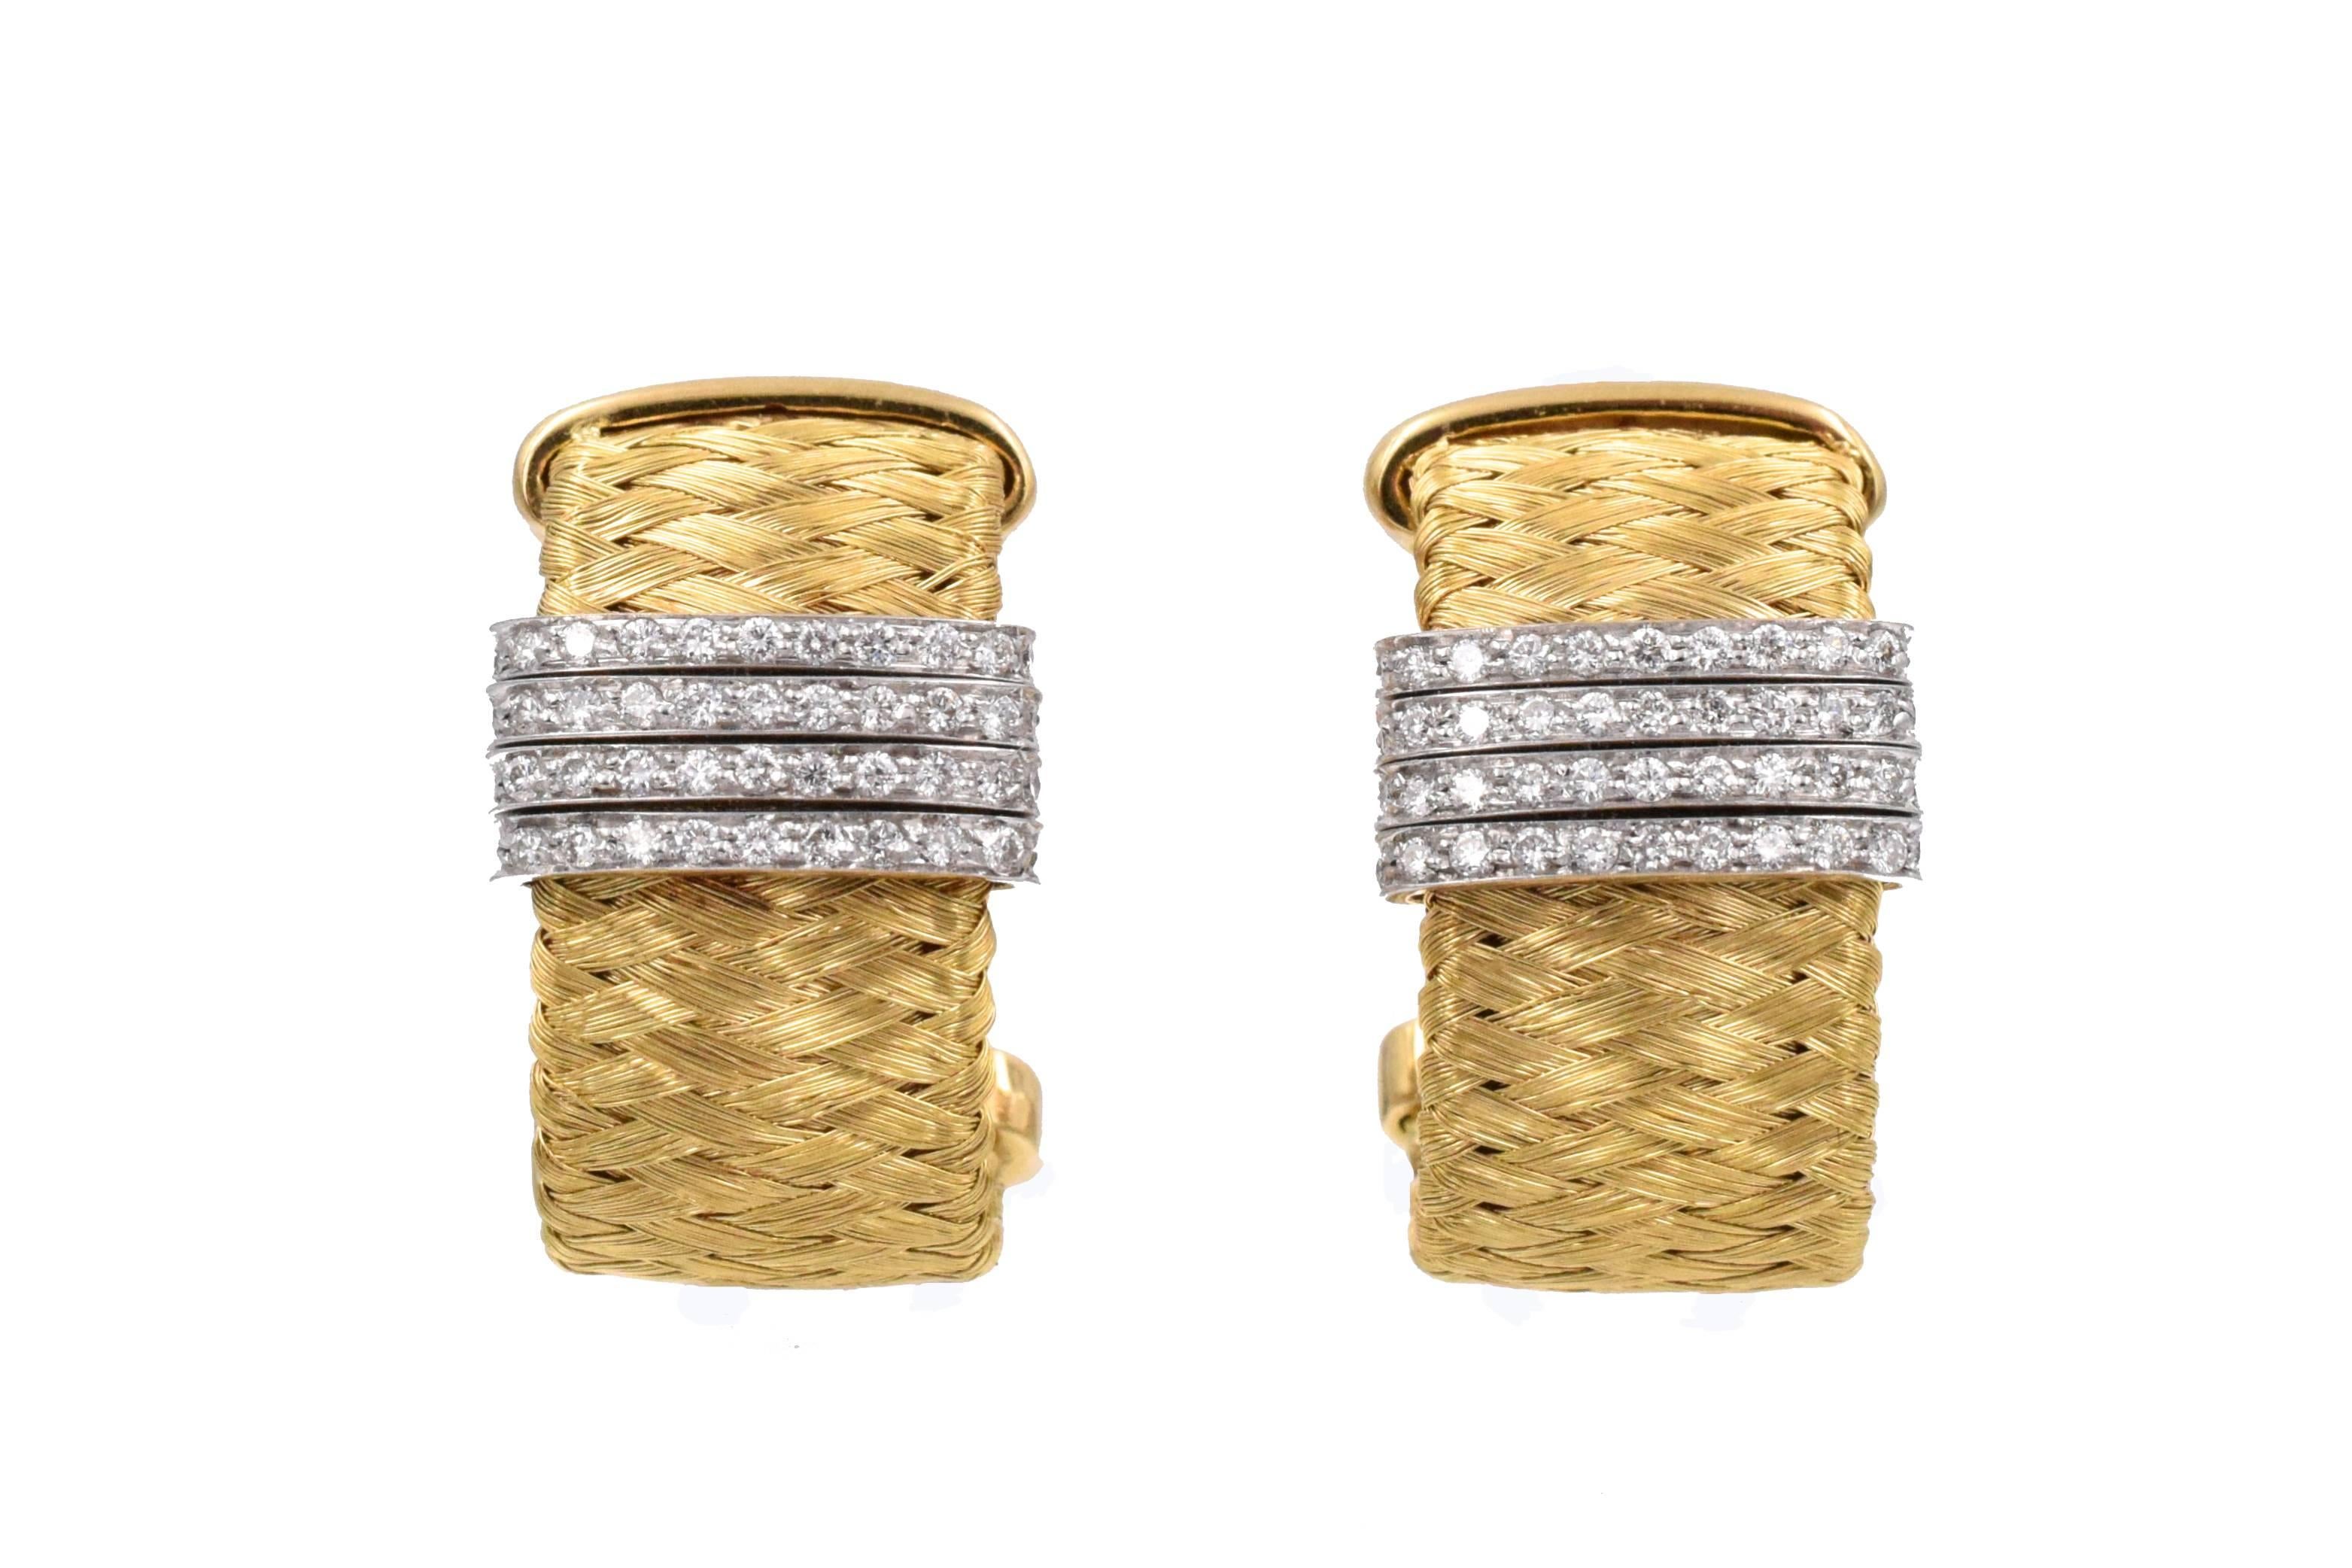 Roberto Coin gold & diamond earrings with matching bracelet. 28k gold woven mesh style with 143 fine brilliant shape diamonds set in  white gold.
 Estimated diamond weight is 1.5 carats
With the maker's hallmark: round shape ruby & signature.